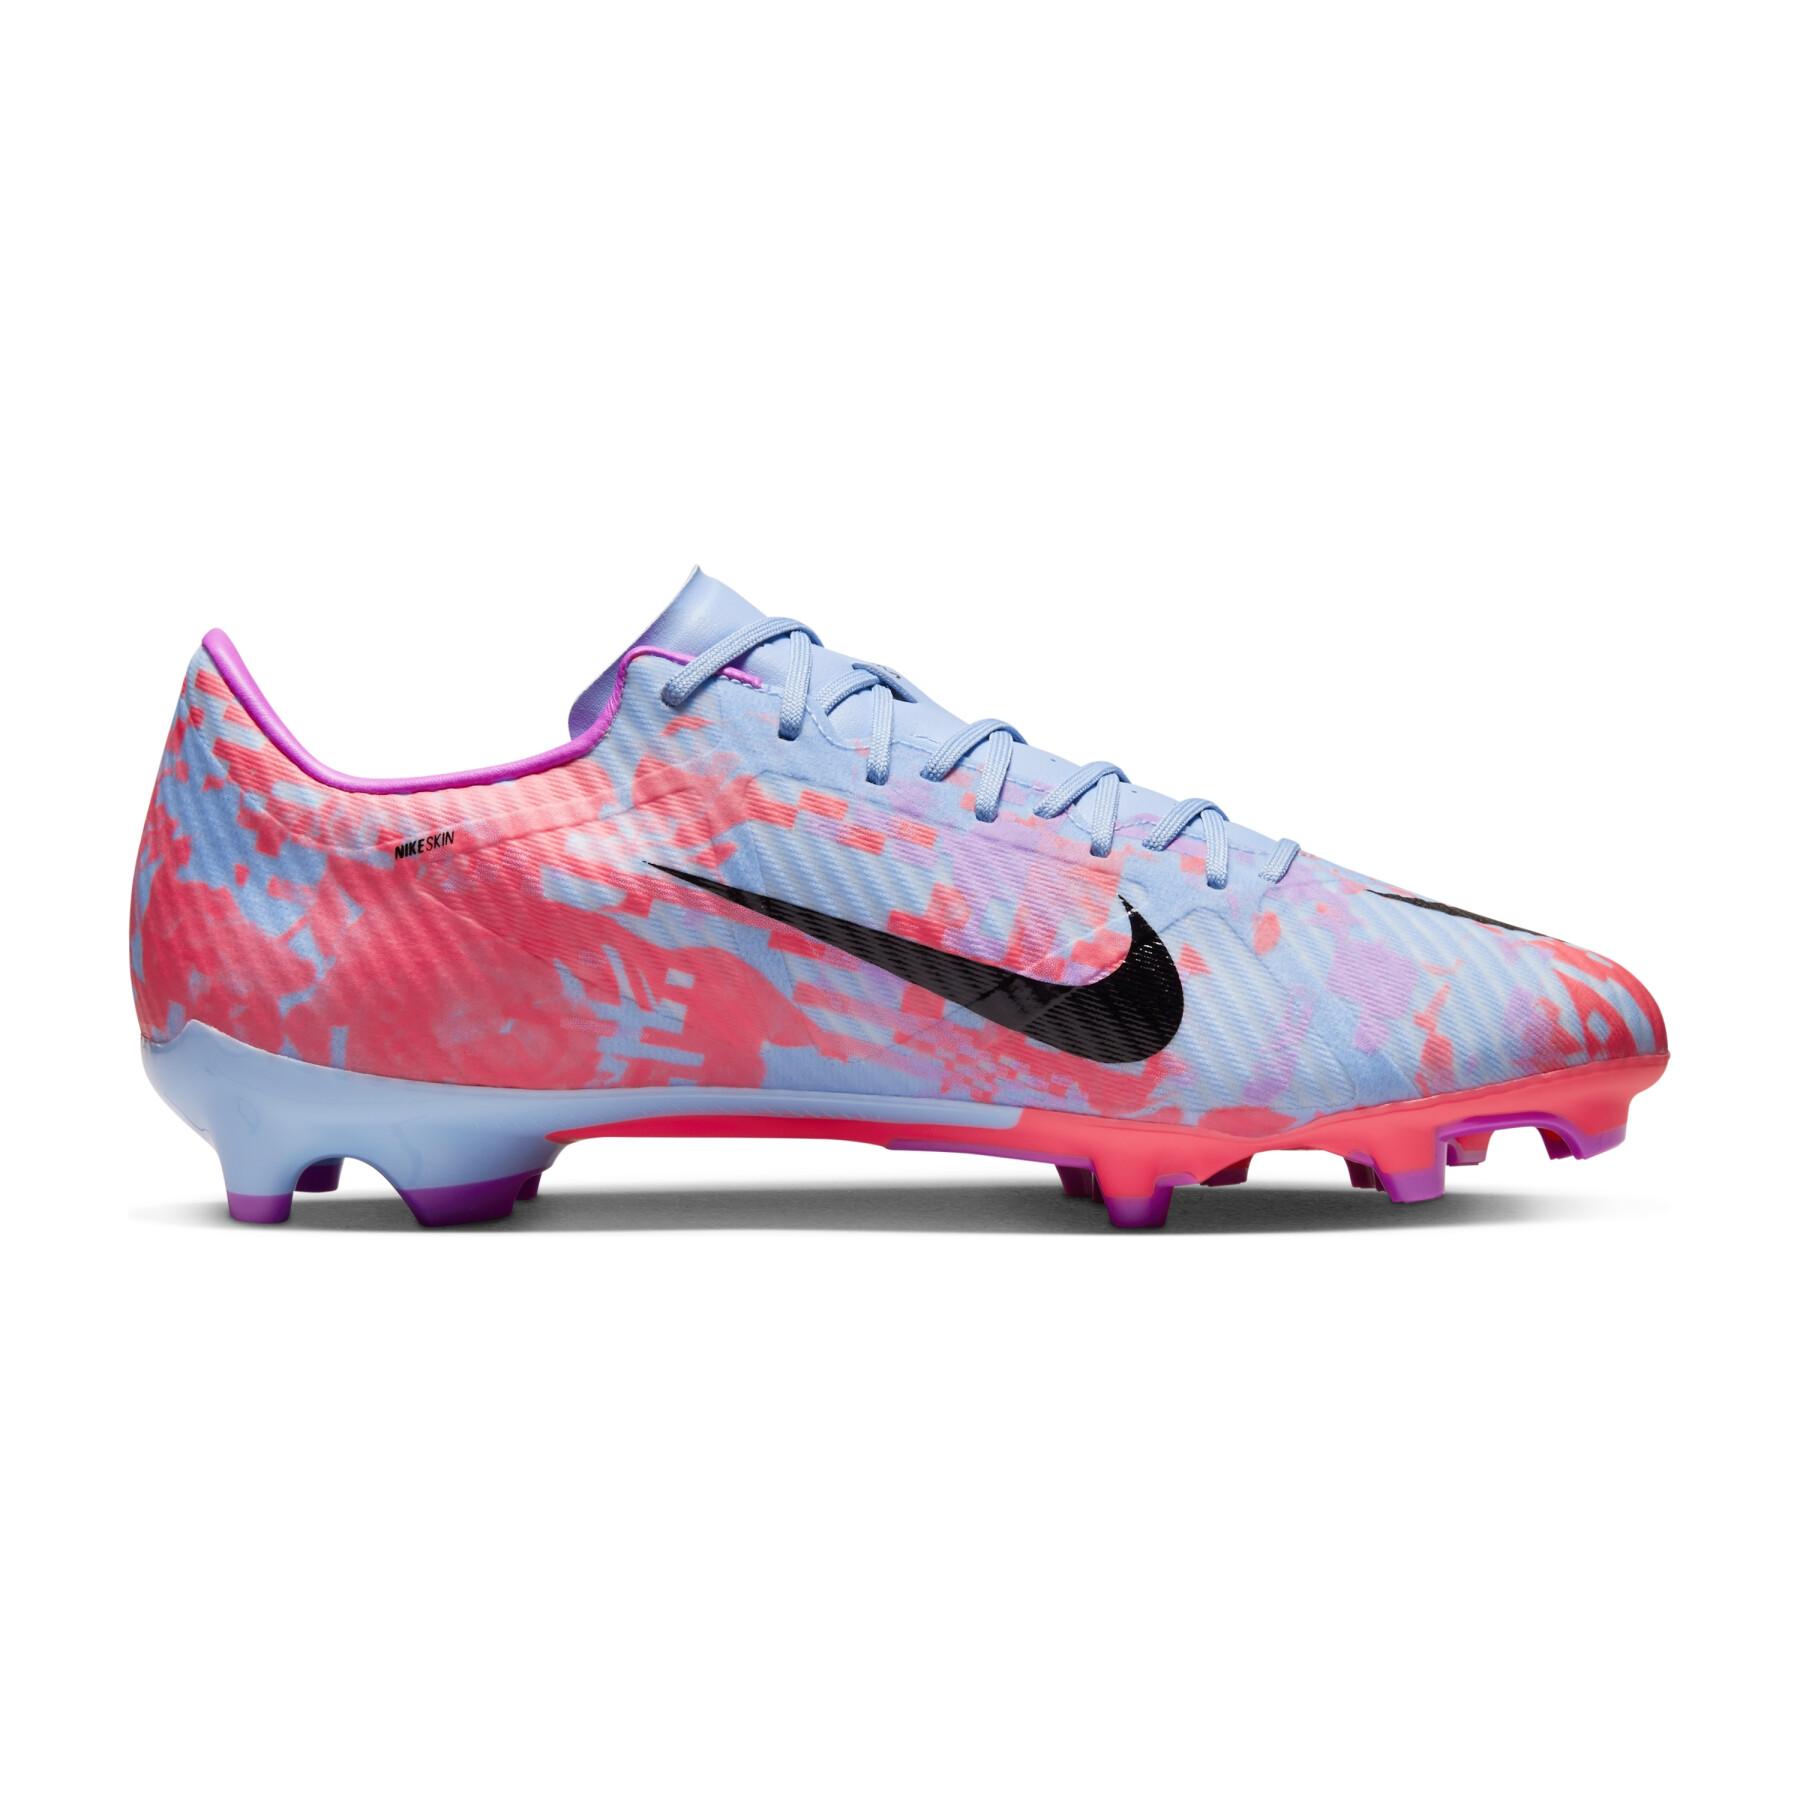 Soccer shoes Nike Mercurial Vapor 15 Academy FG/MG - MDS pack